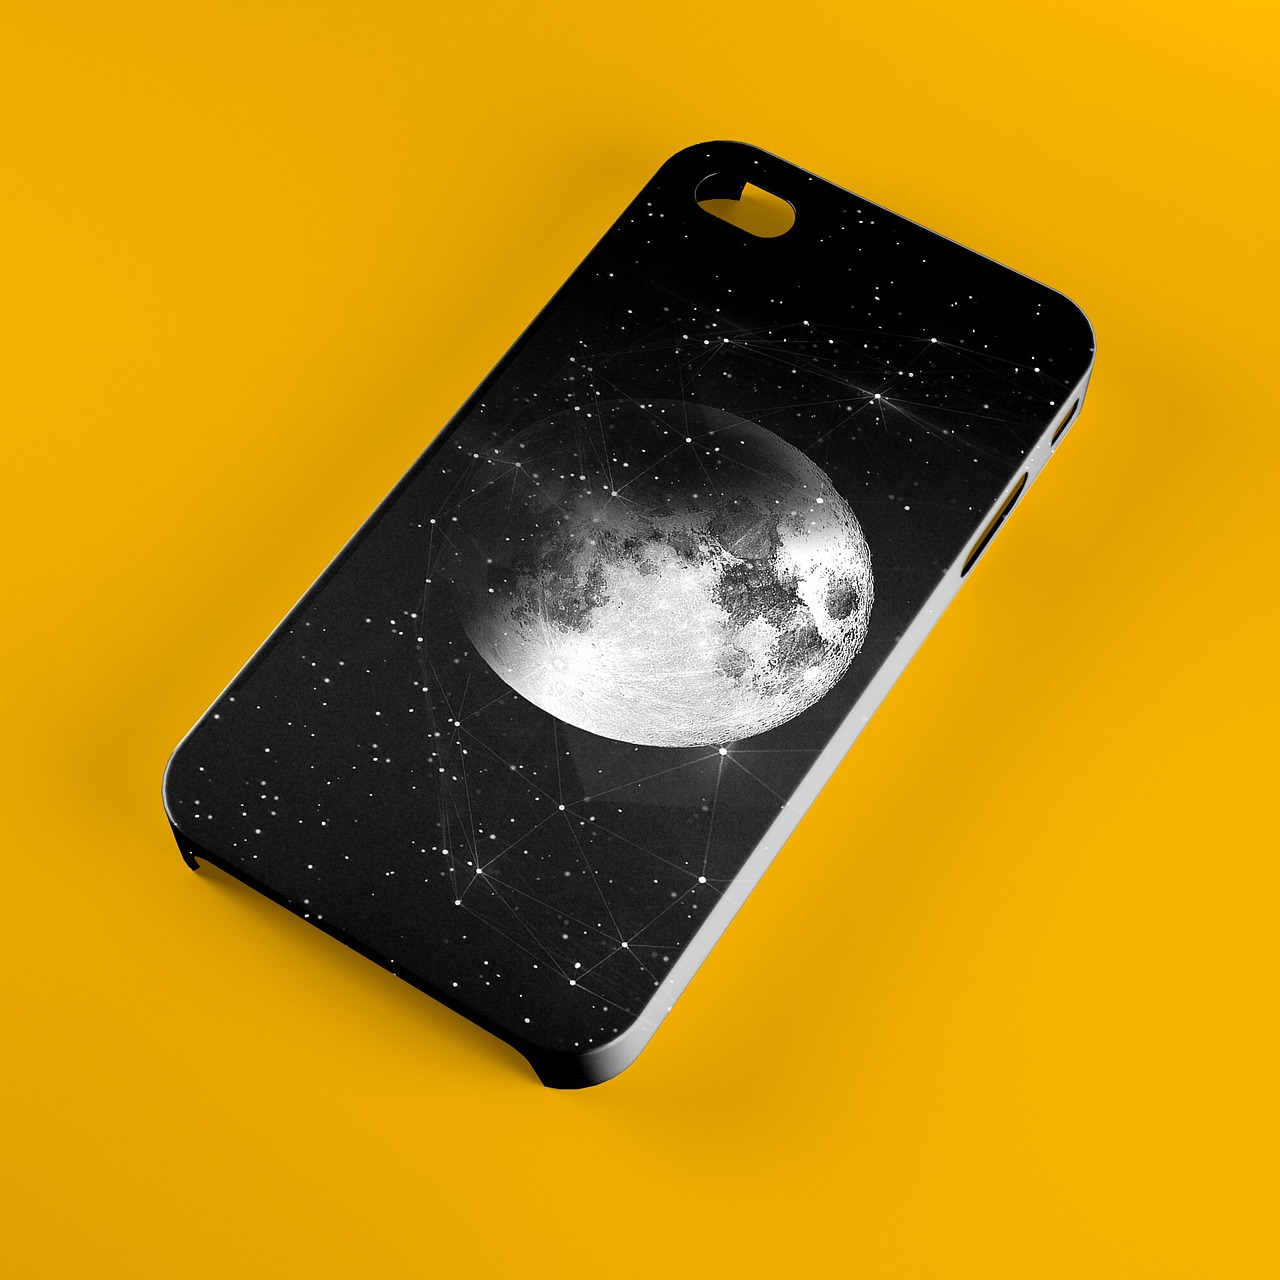 starry sky moon mobile phone shell free photo